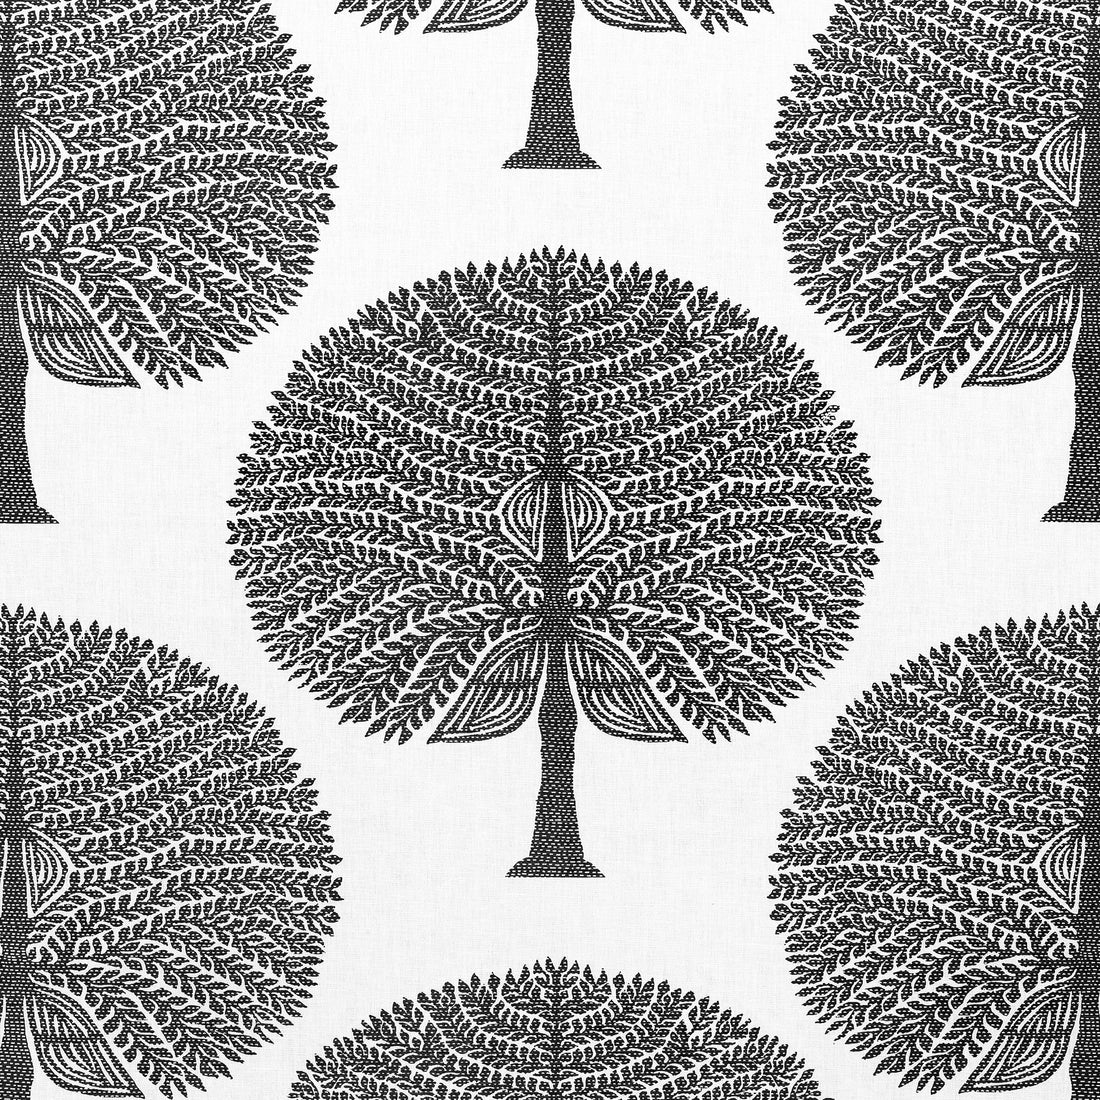 Mulberry Tree fabric in black and white color - pattern number F910602 - by Thibaut in the Ceylon collection